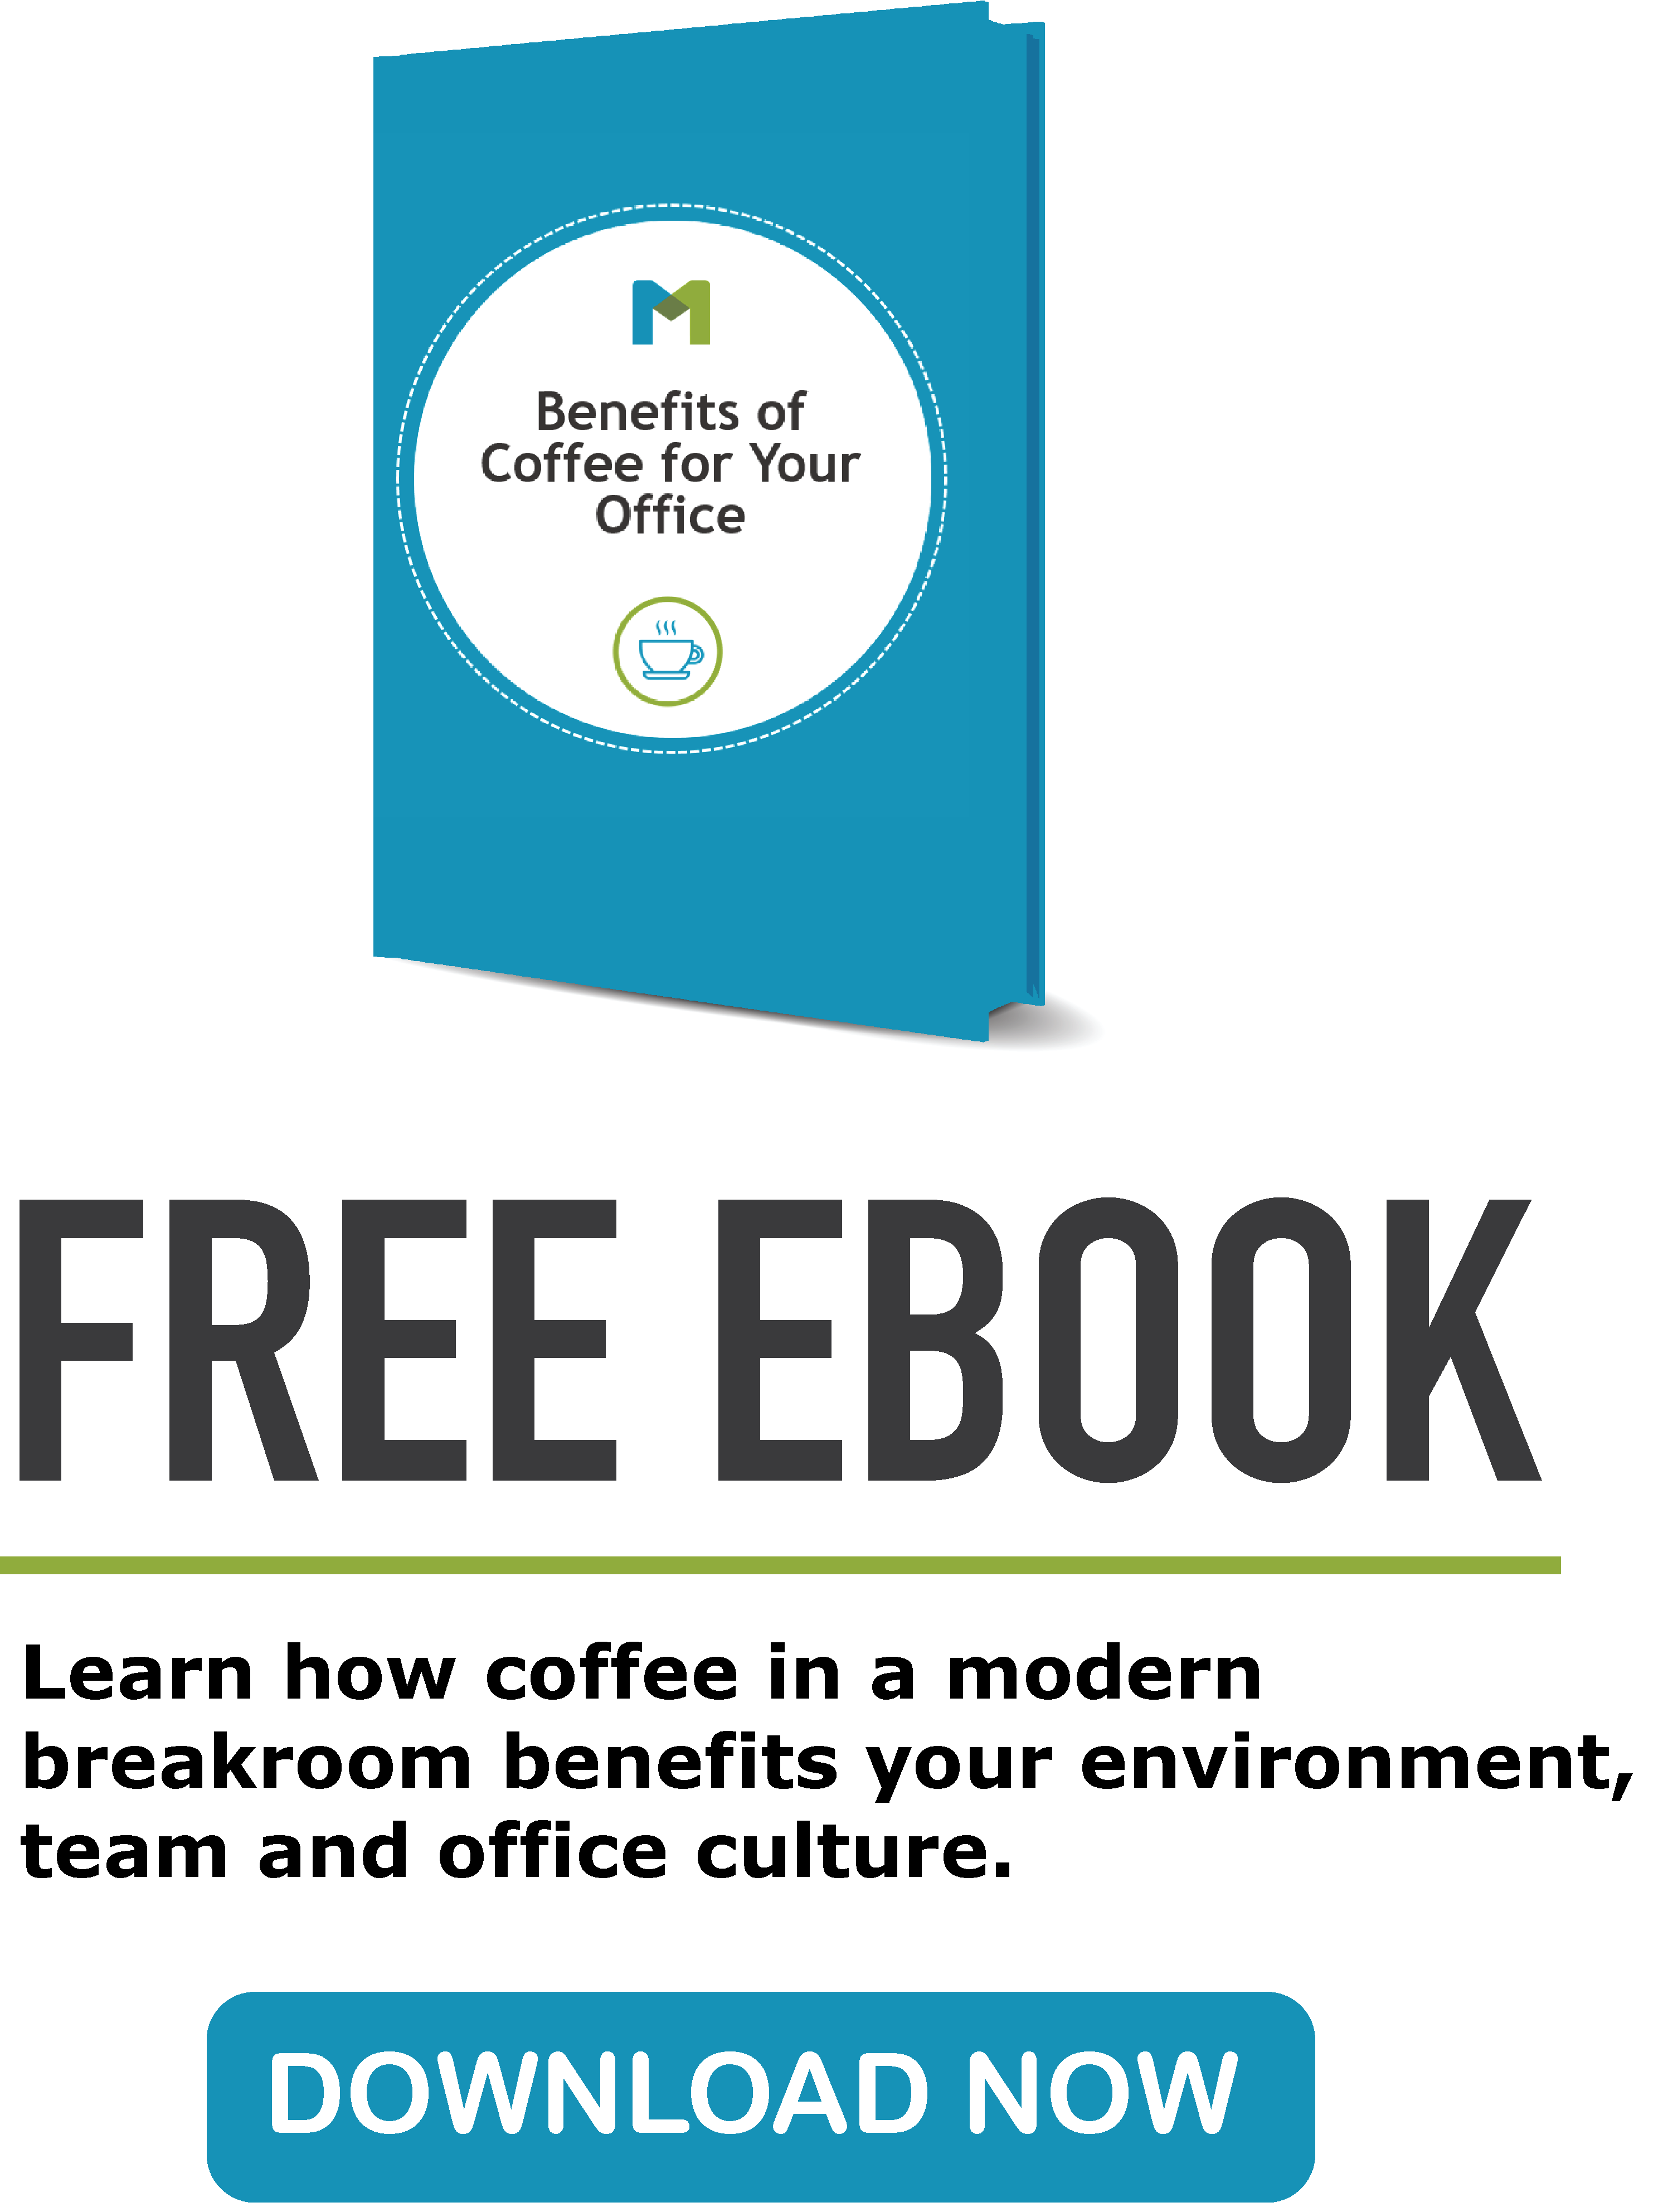 Free eBook: Benefits of Coffee for Your Office